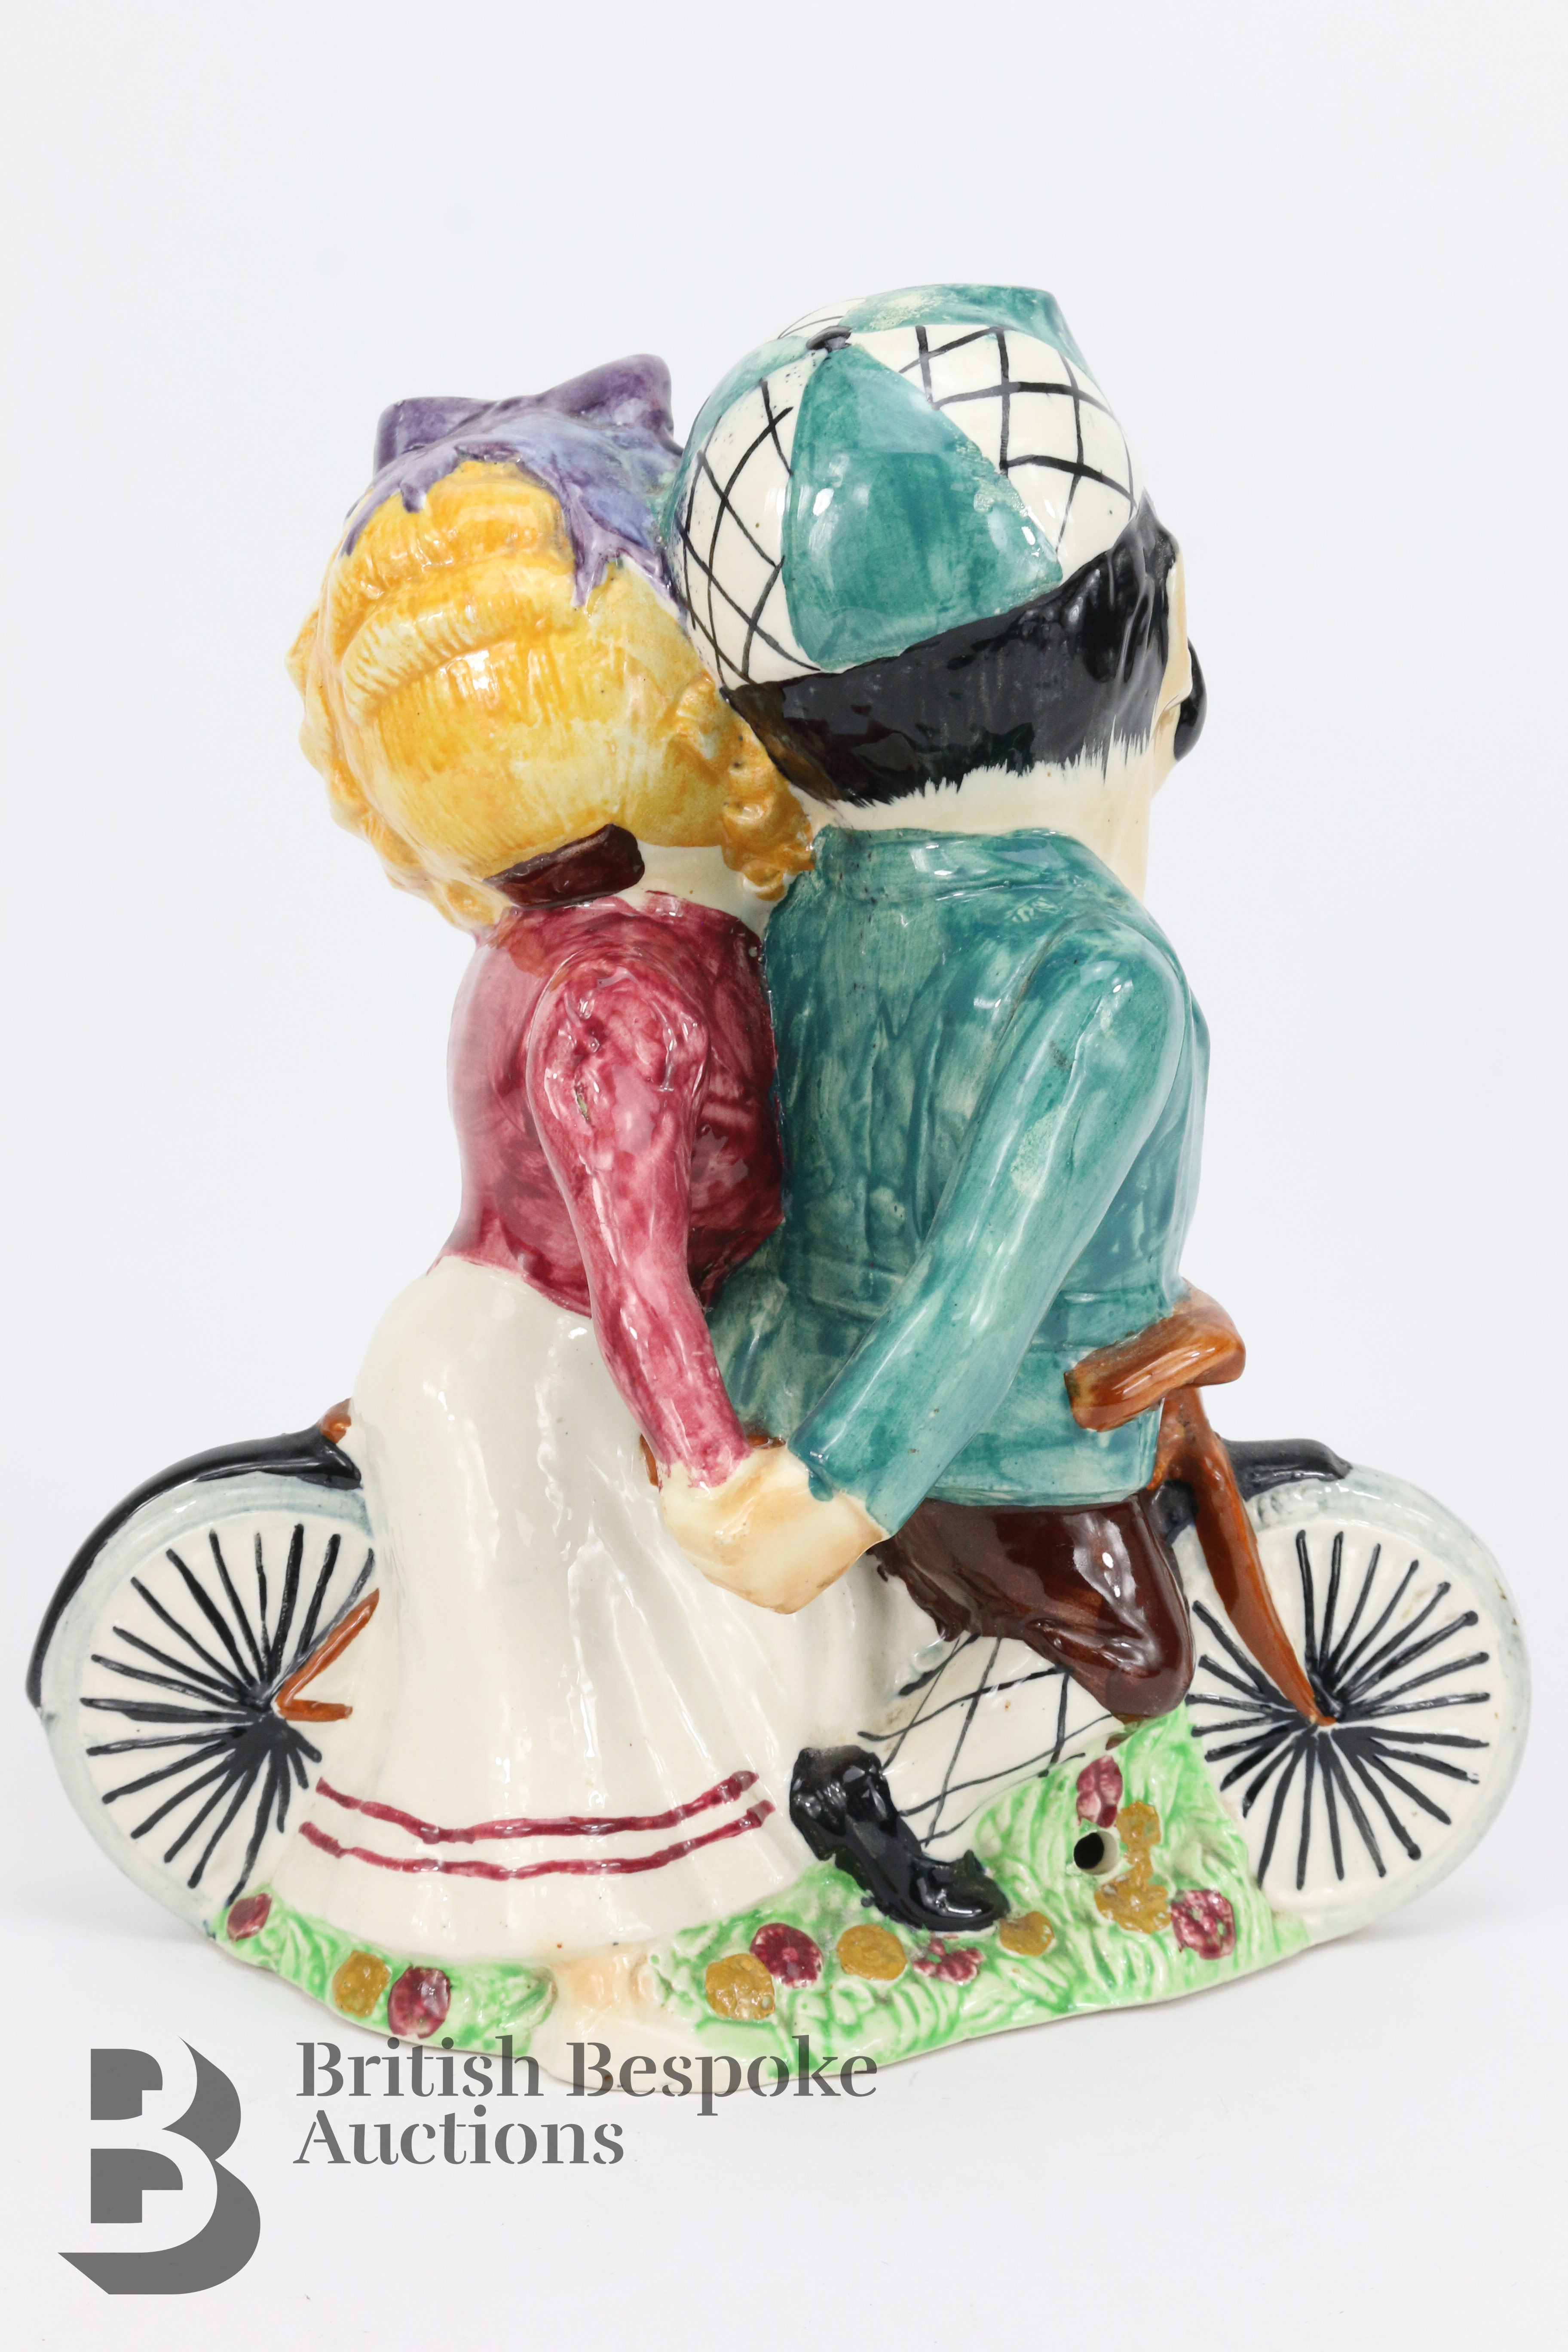 Novelty Tandem Lamp Base by Daisy Bell - Image 7 of 11